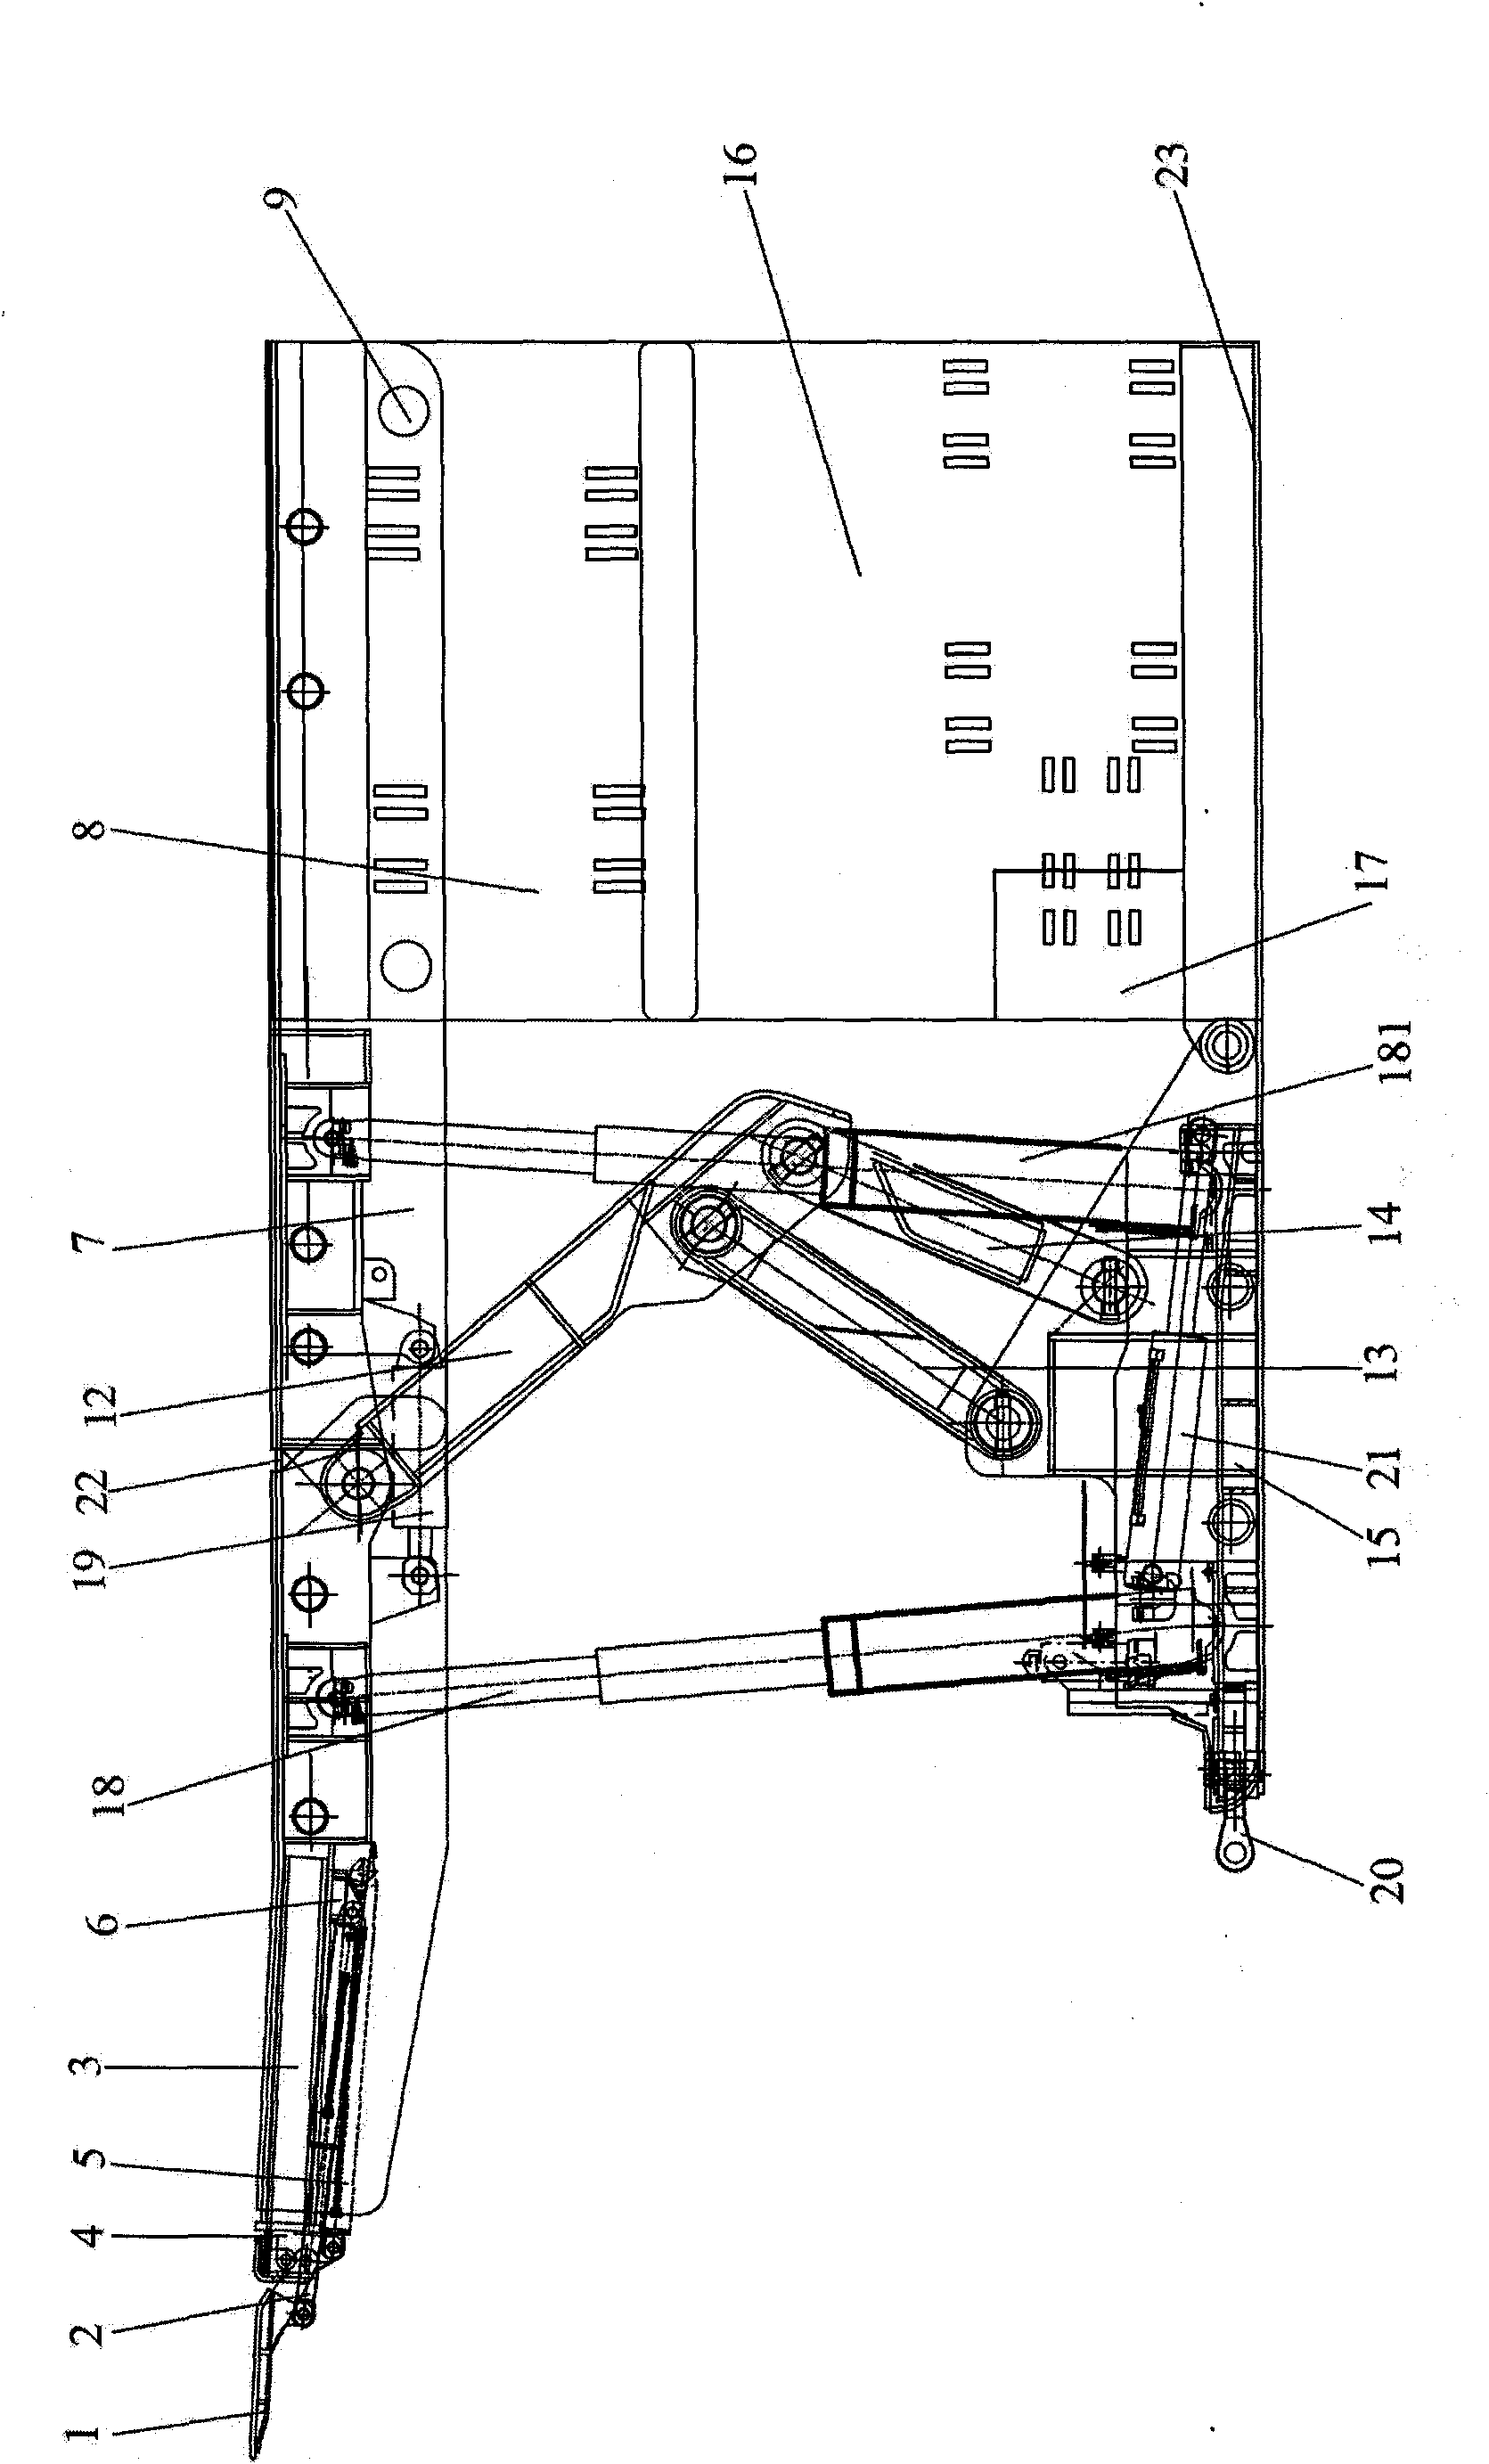 Filling supporting partition board bracket